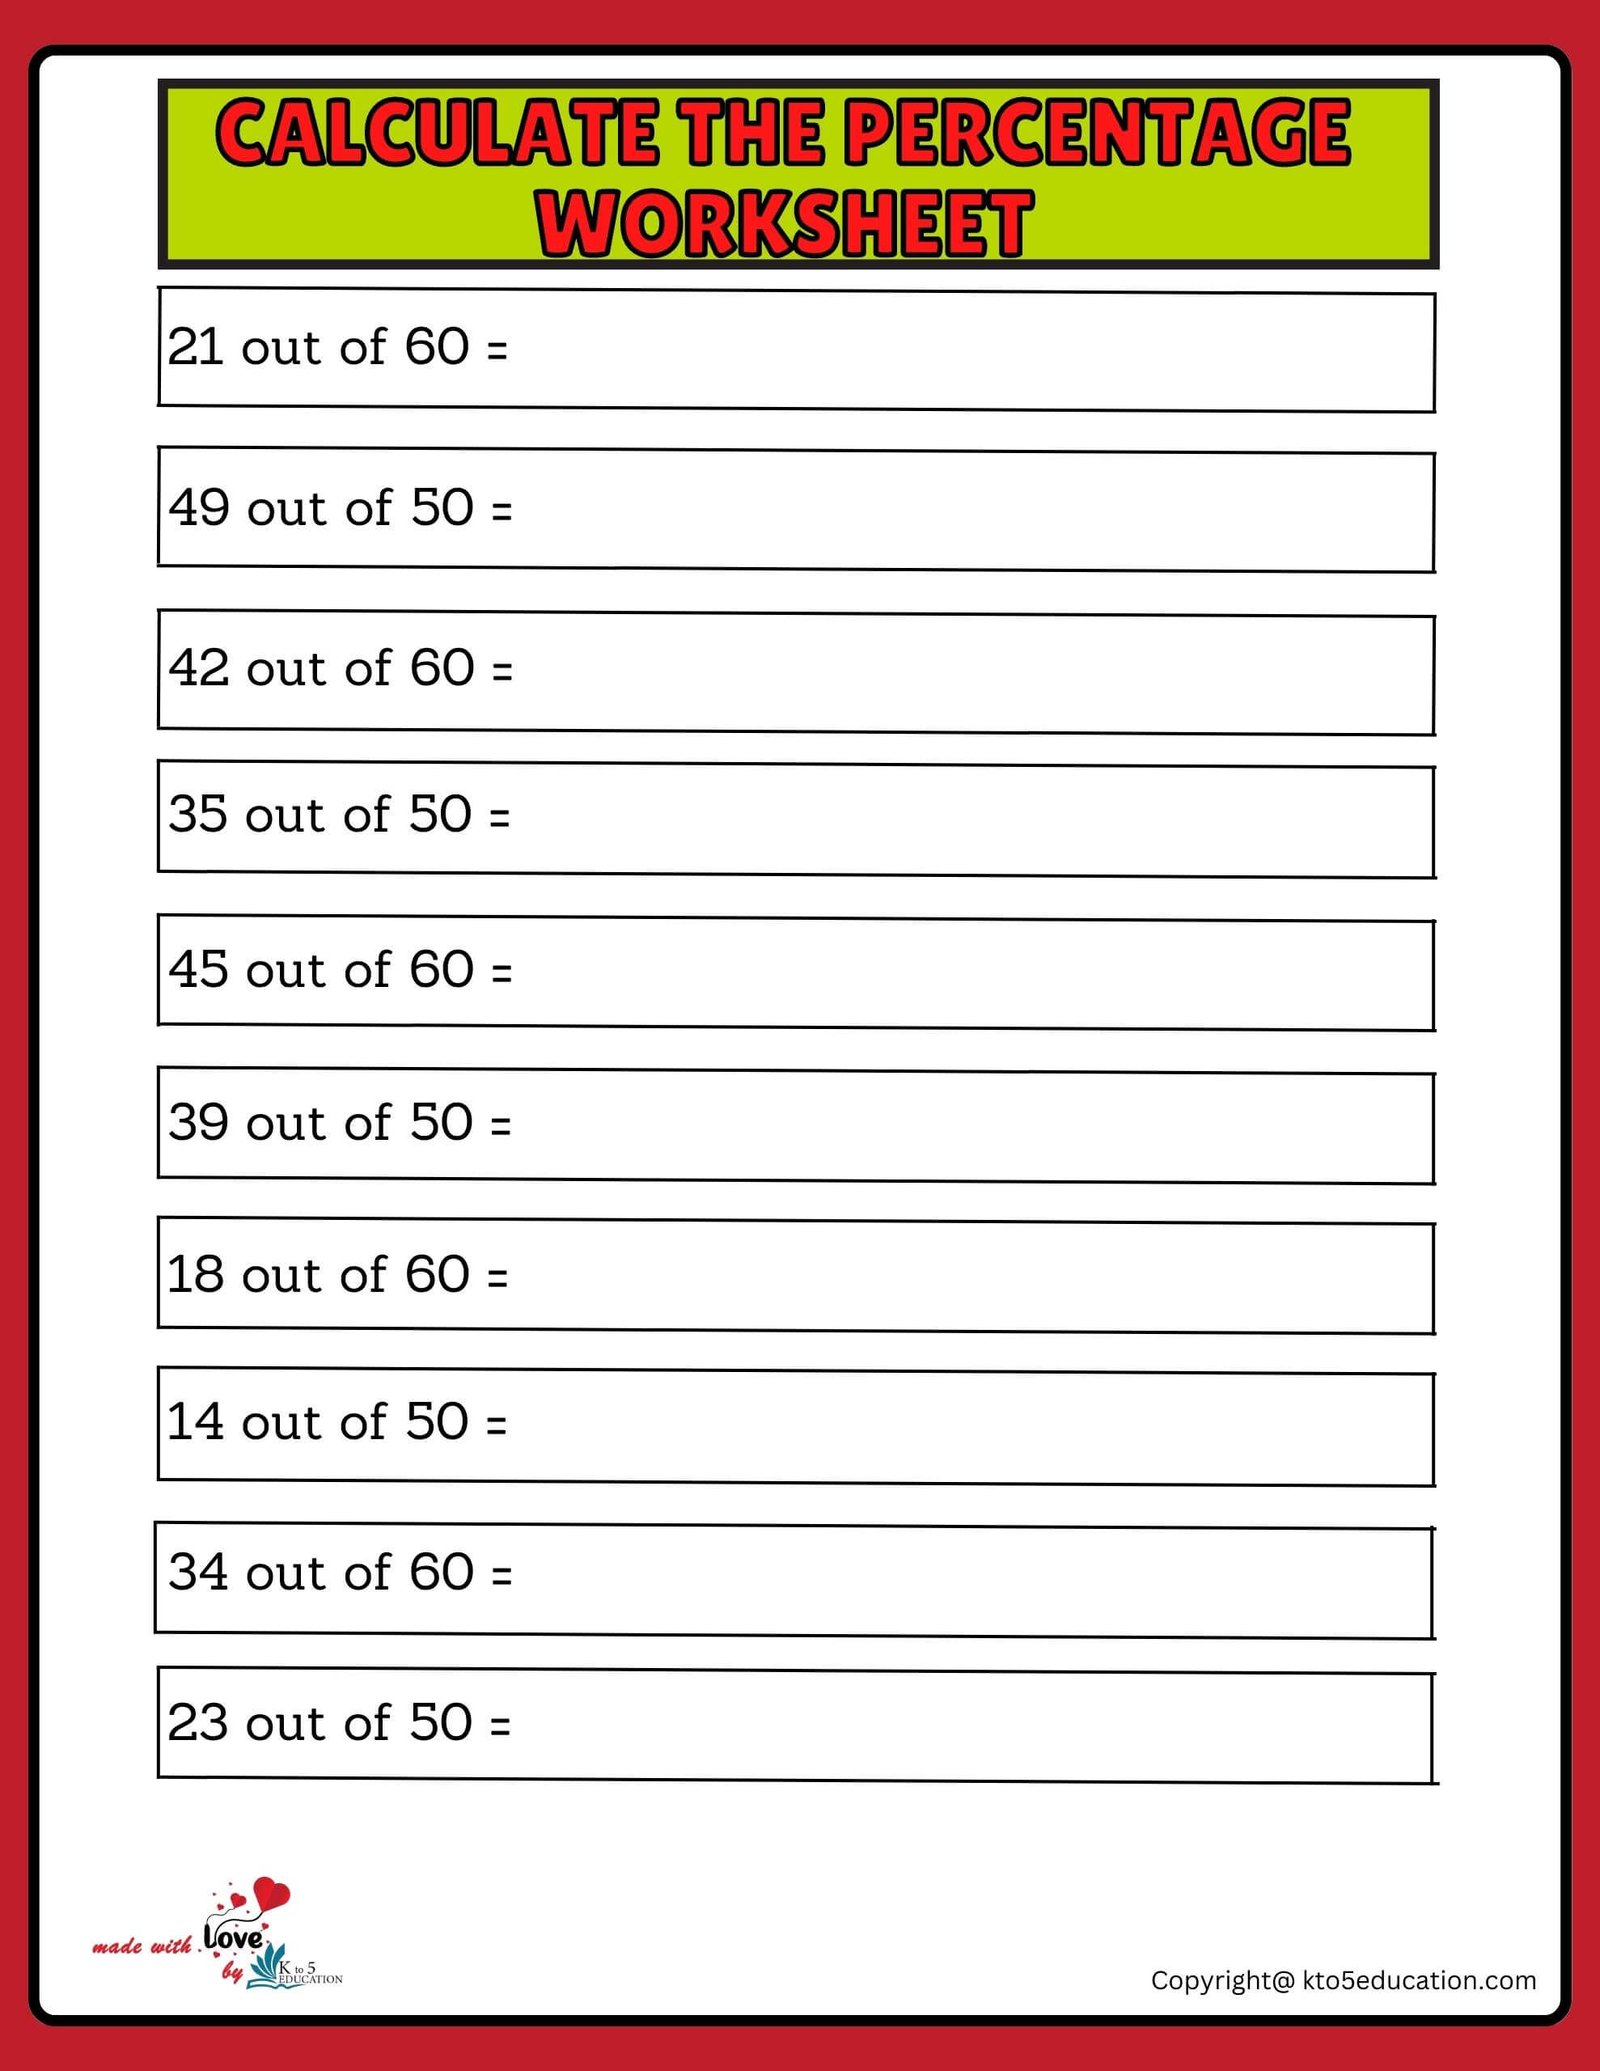 Calculate Percentage In 50 To 60 Worksheet